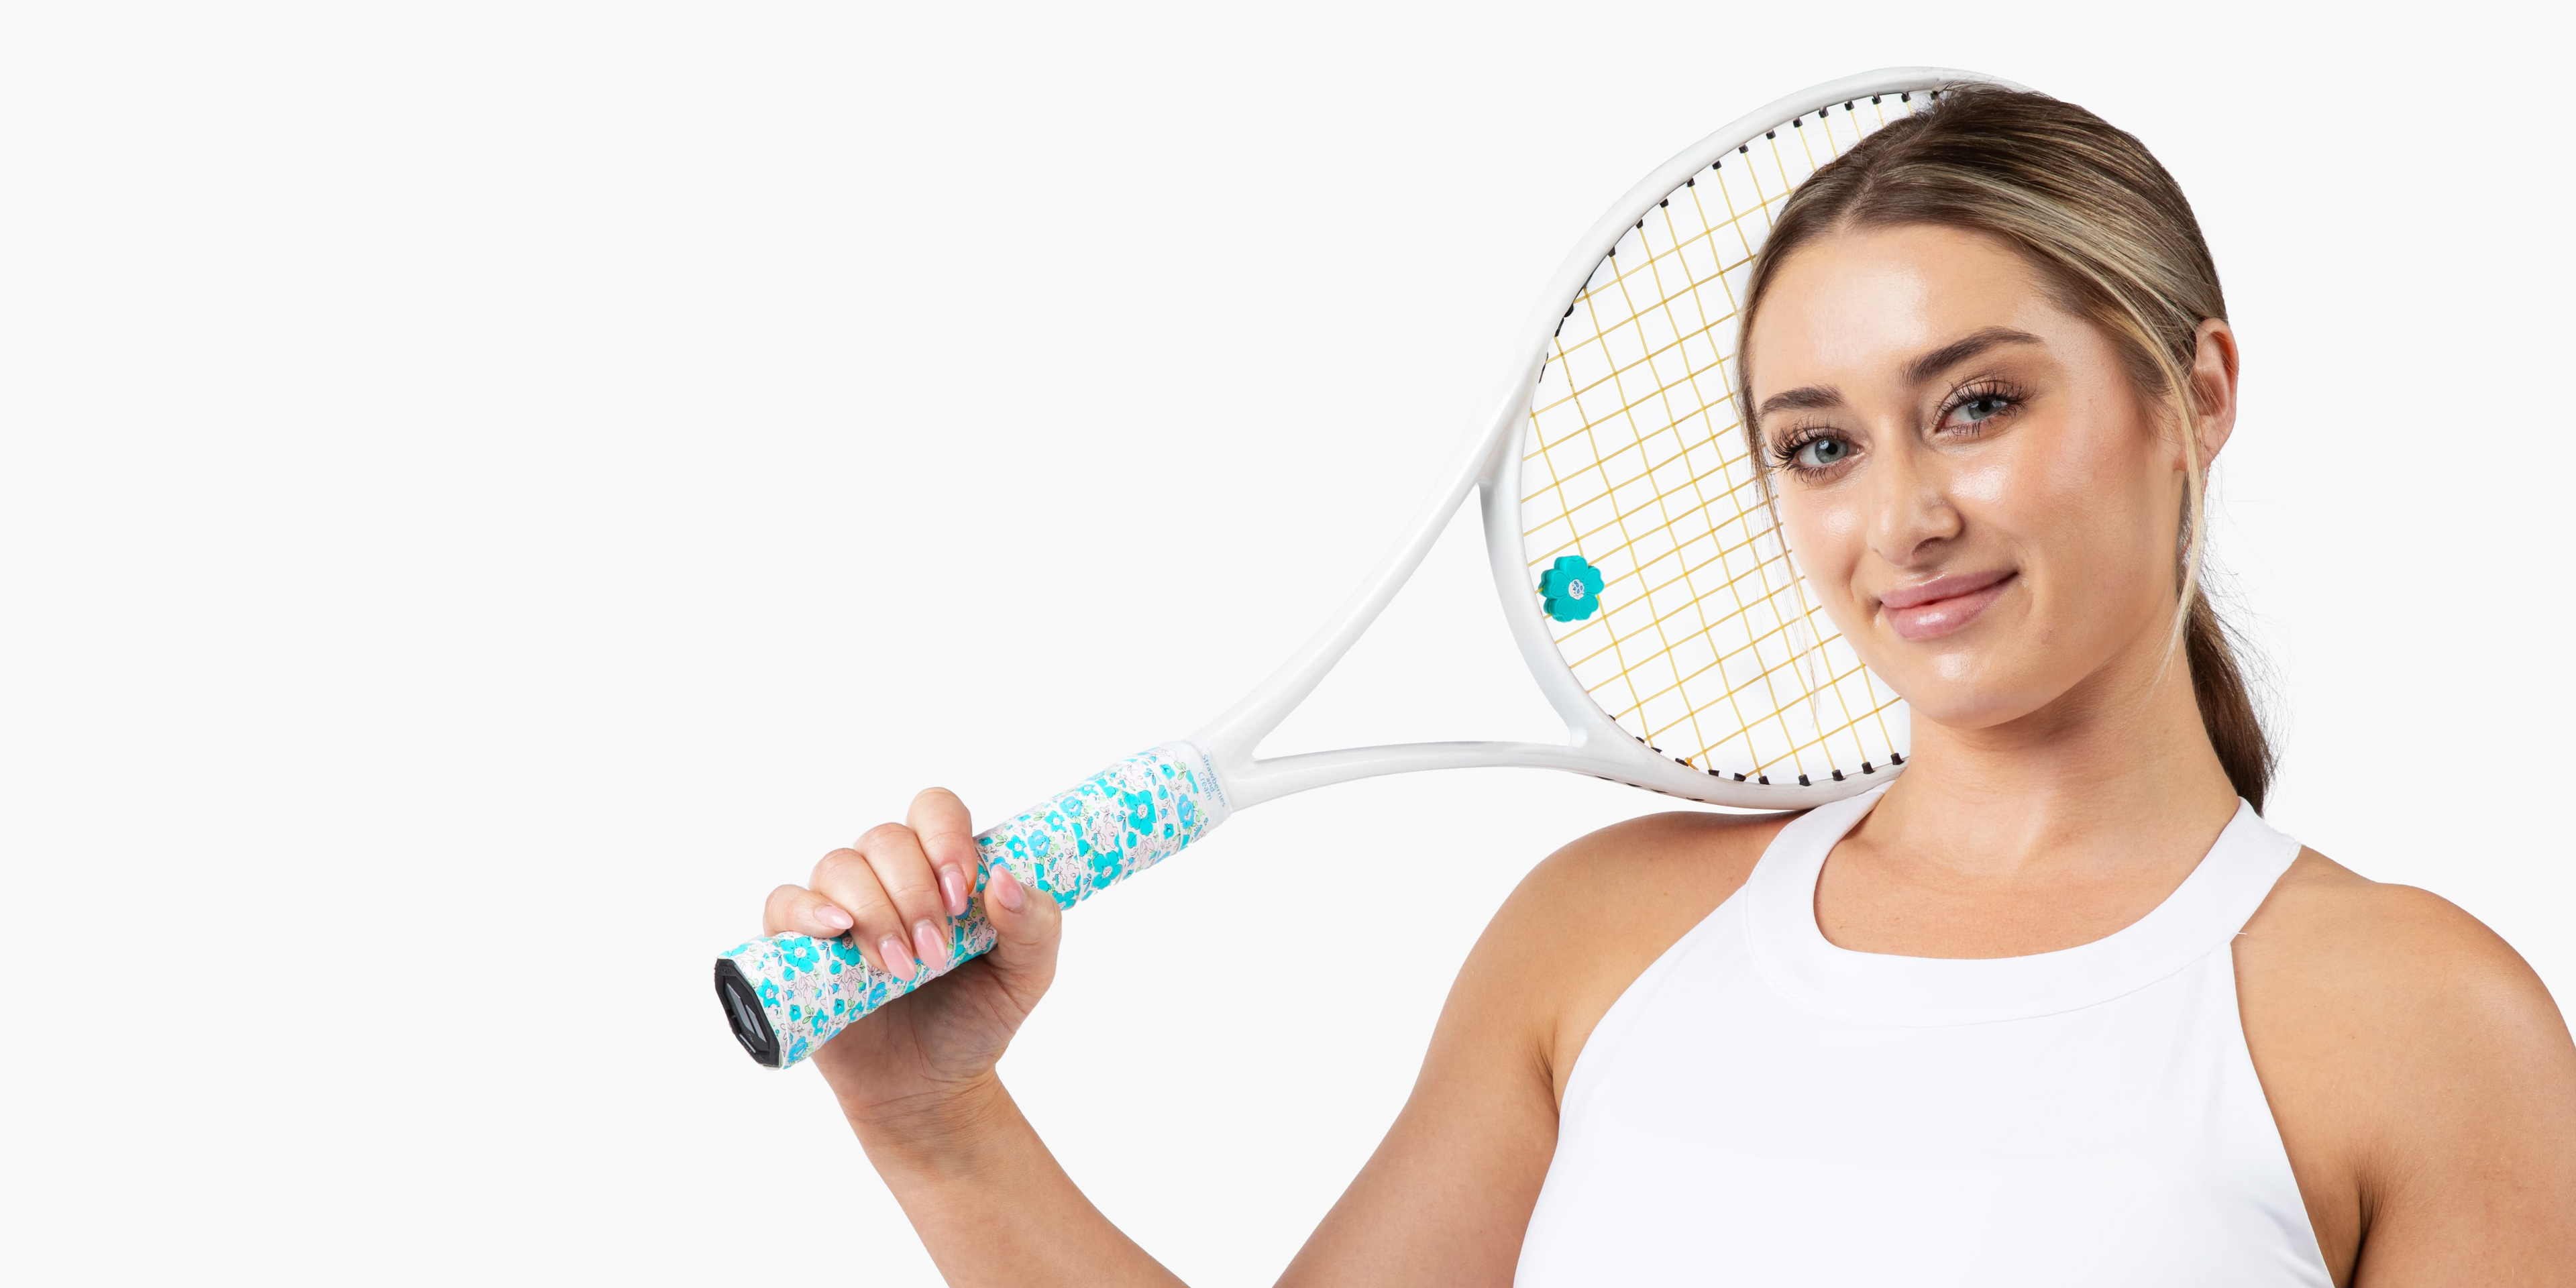 Beautiful lady holding a tennis racket adorned with The Anneliese Collection matching overgrip and dampener - Turquoise